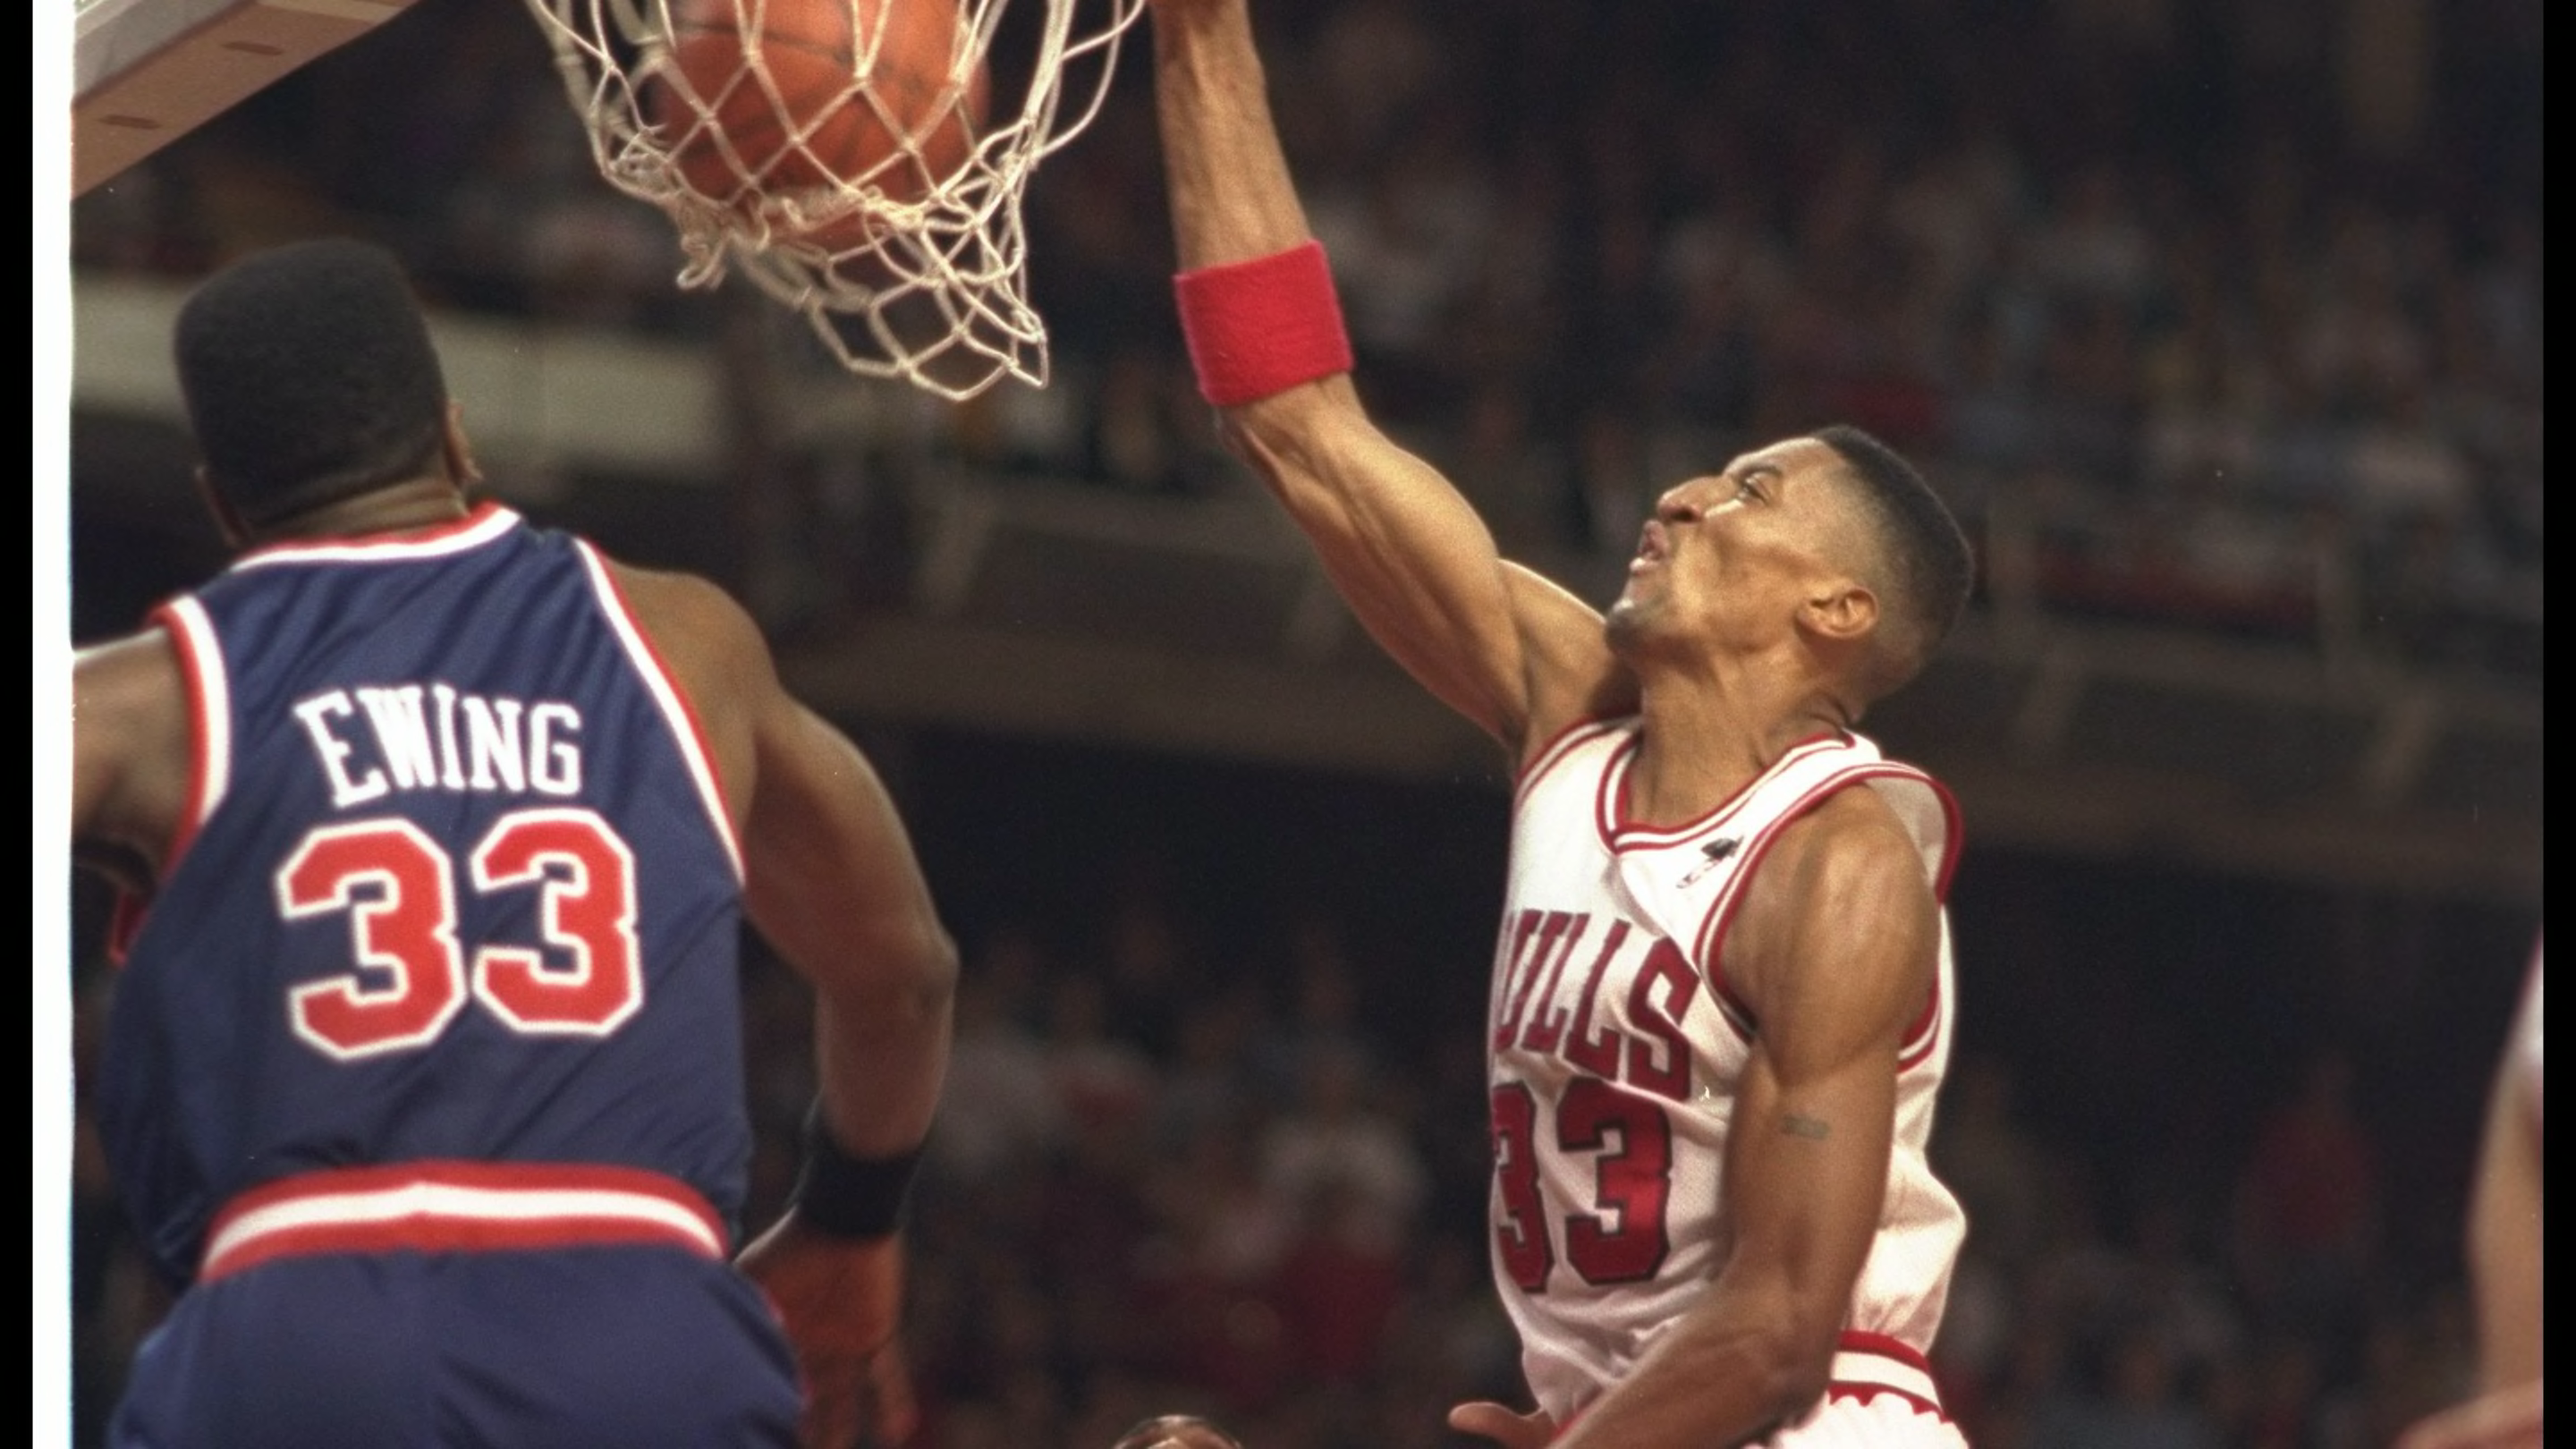 It's Been 28 Years Since Scottie Pippen Dunked on Patrick Ewing in the
Eastern Conference Finals